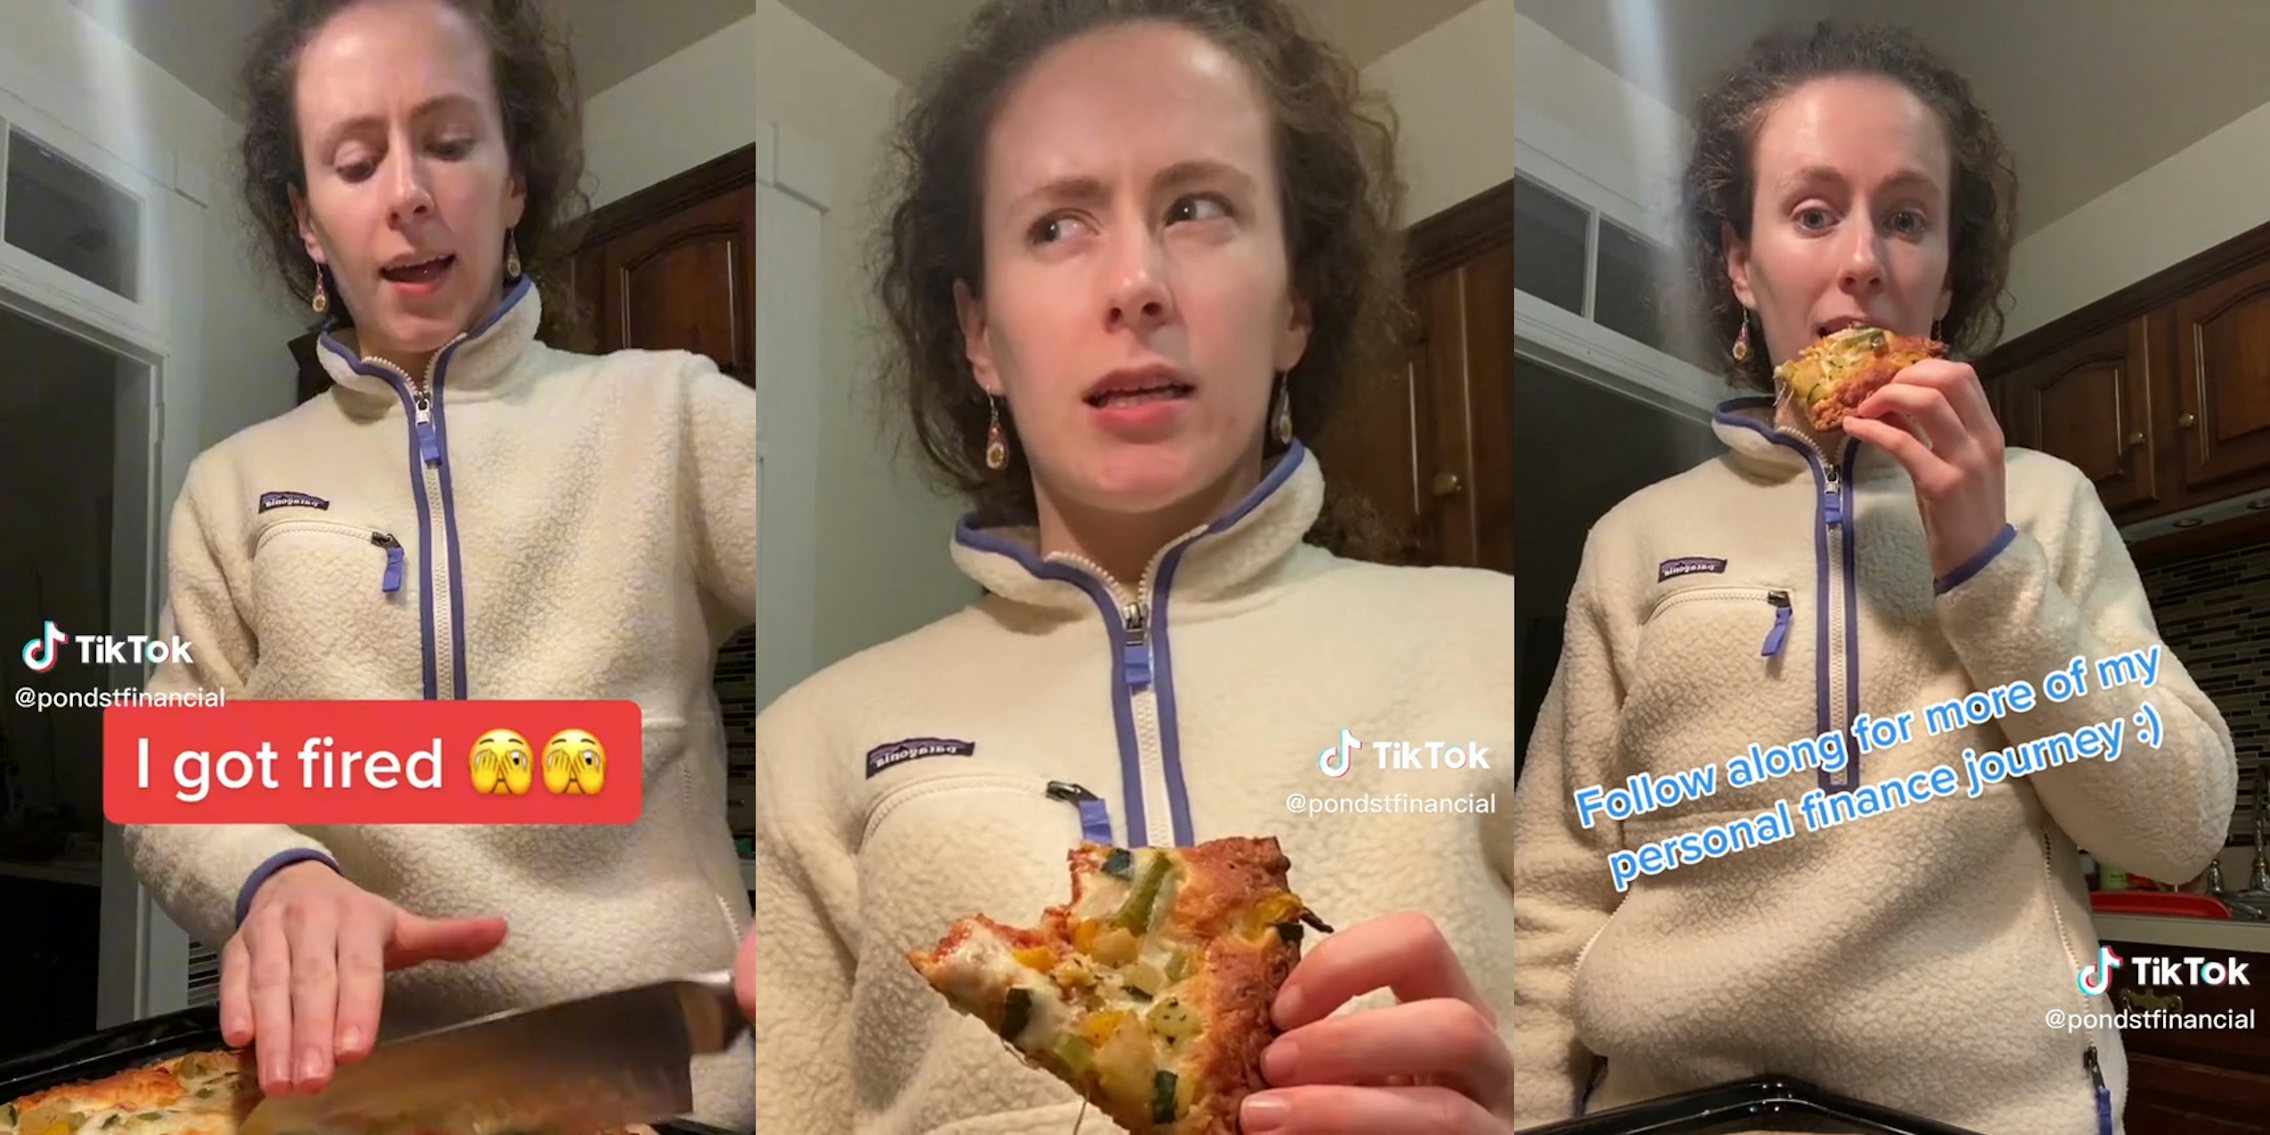 woman cutting and eating pizza in kitchen